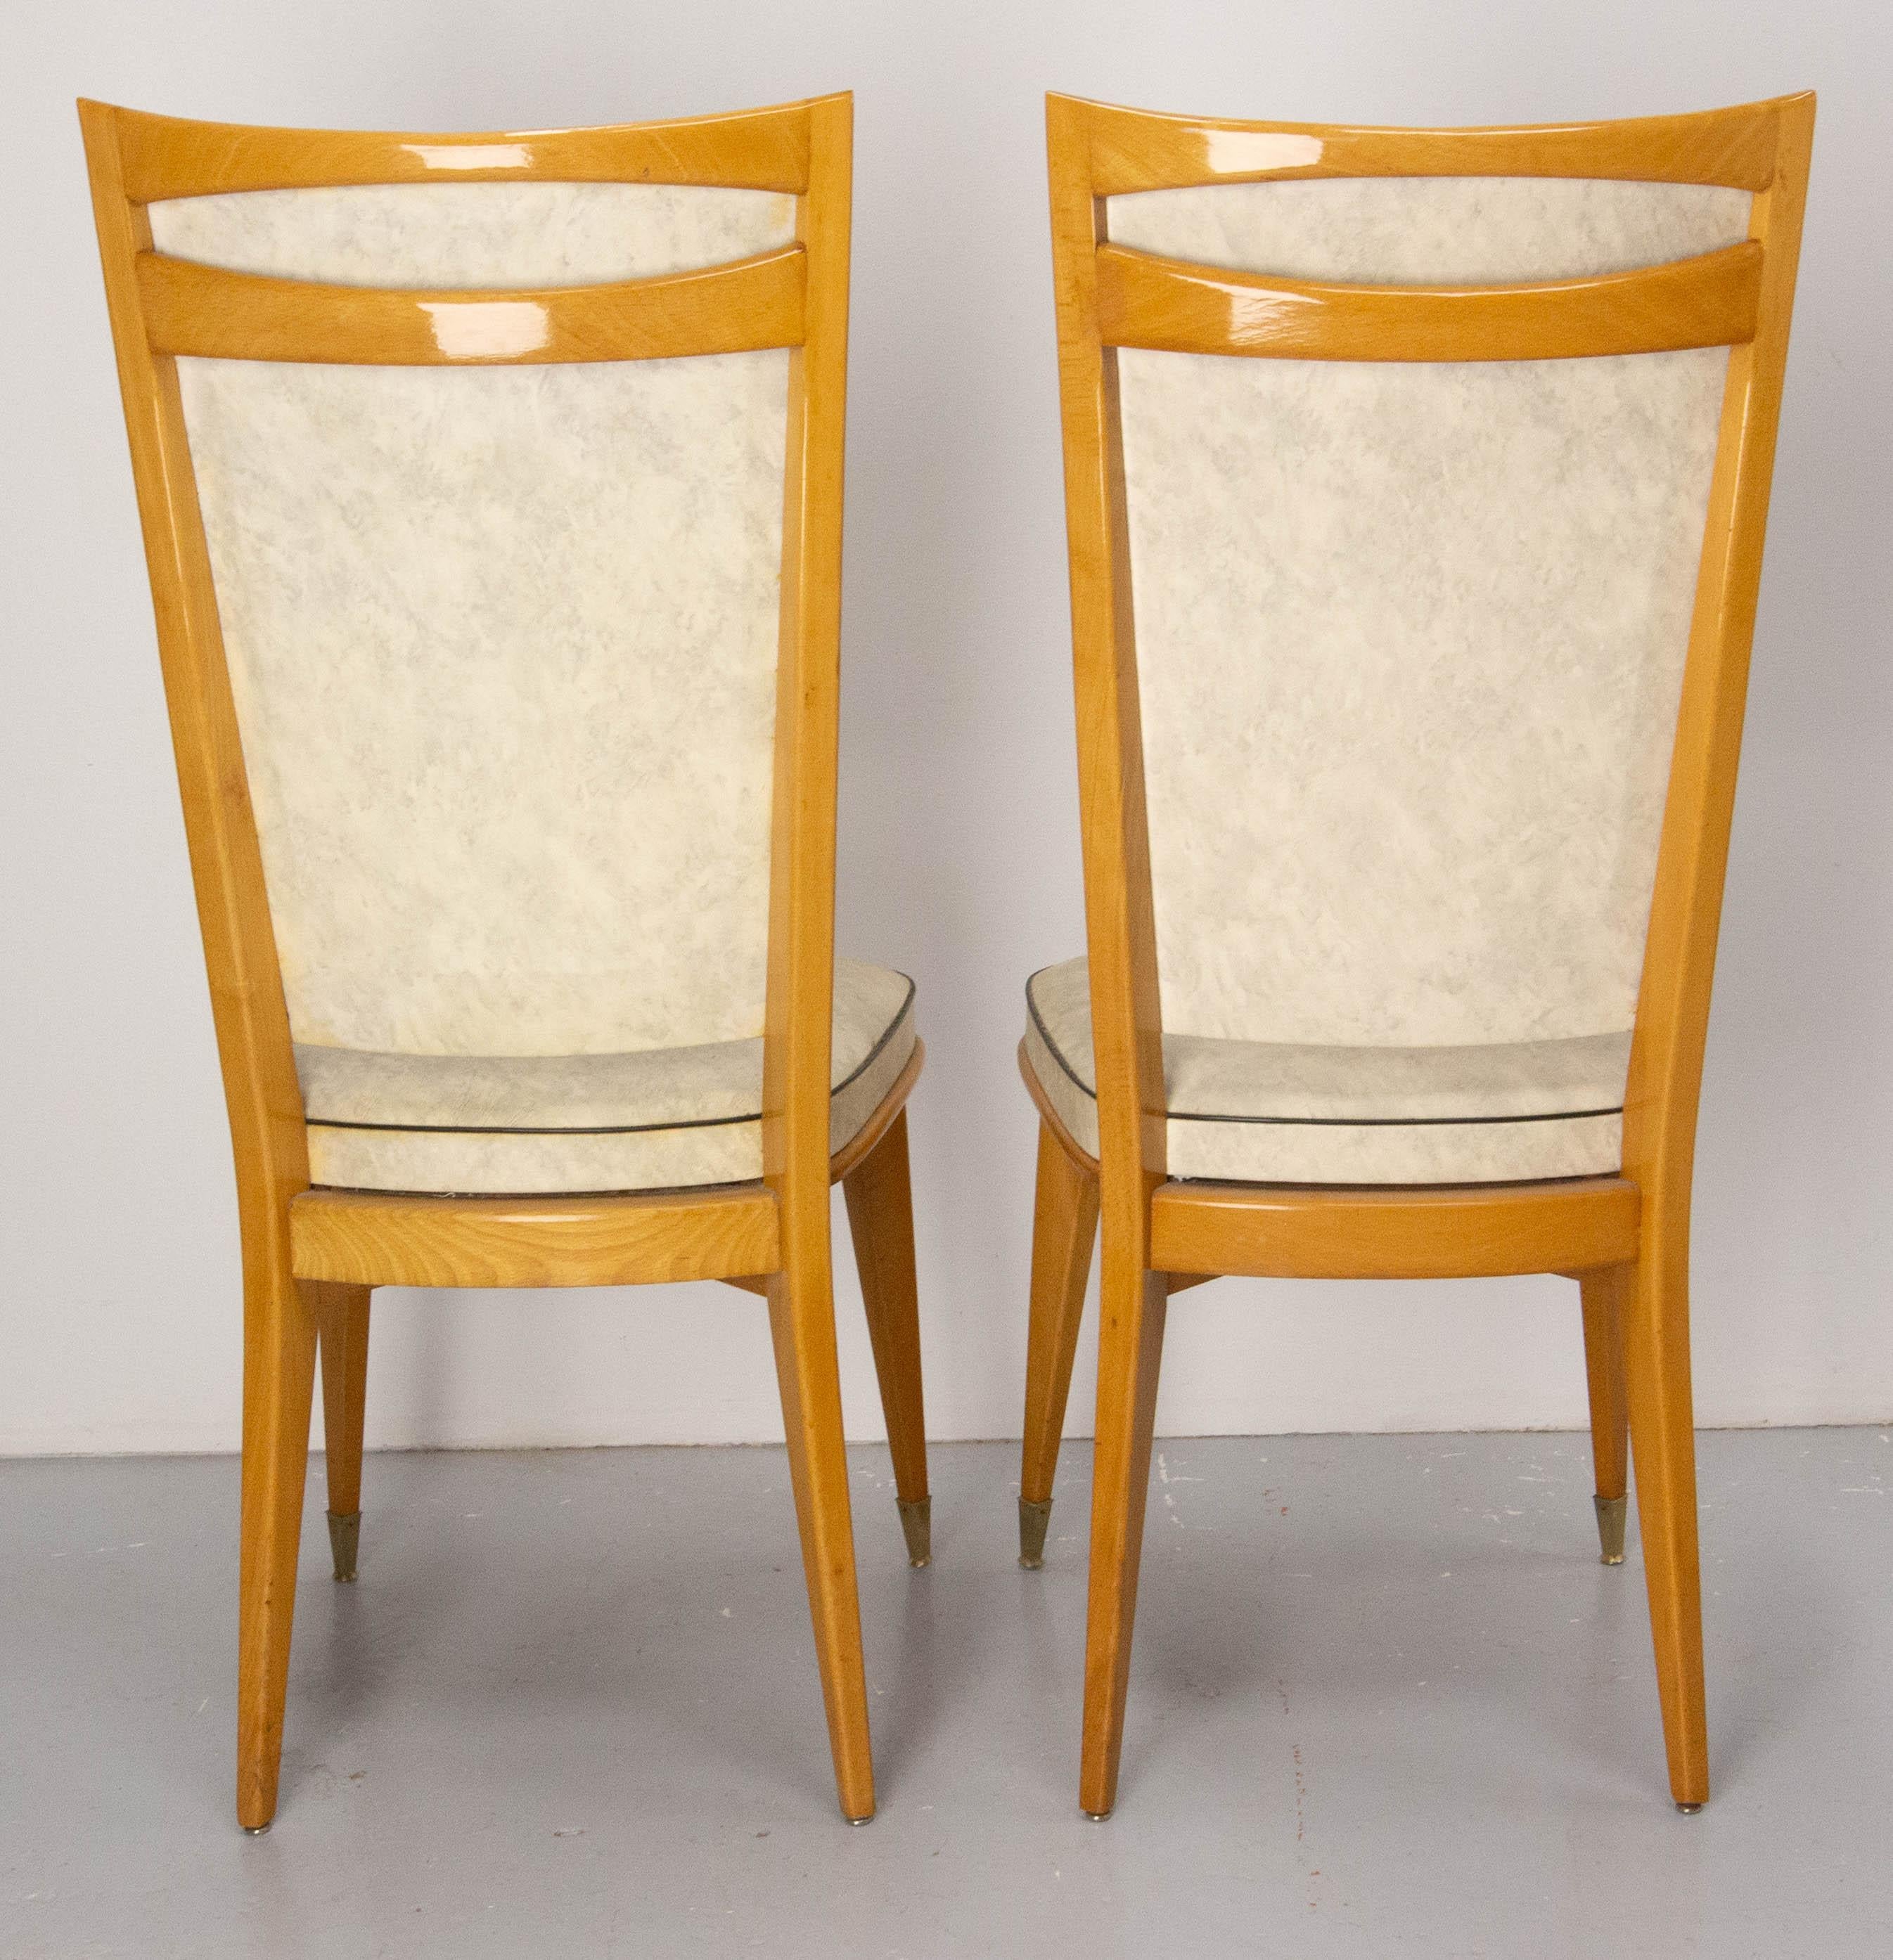 Six Dining Chairs Beech and Skai Midcentury French, circa 1960 For Sale 2